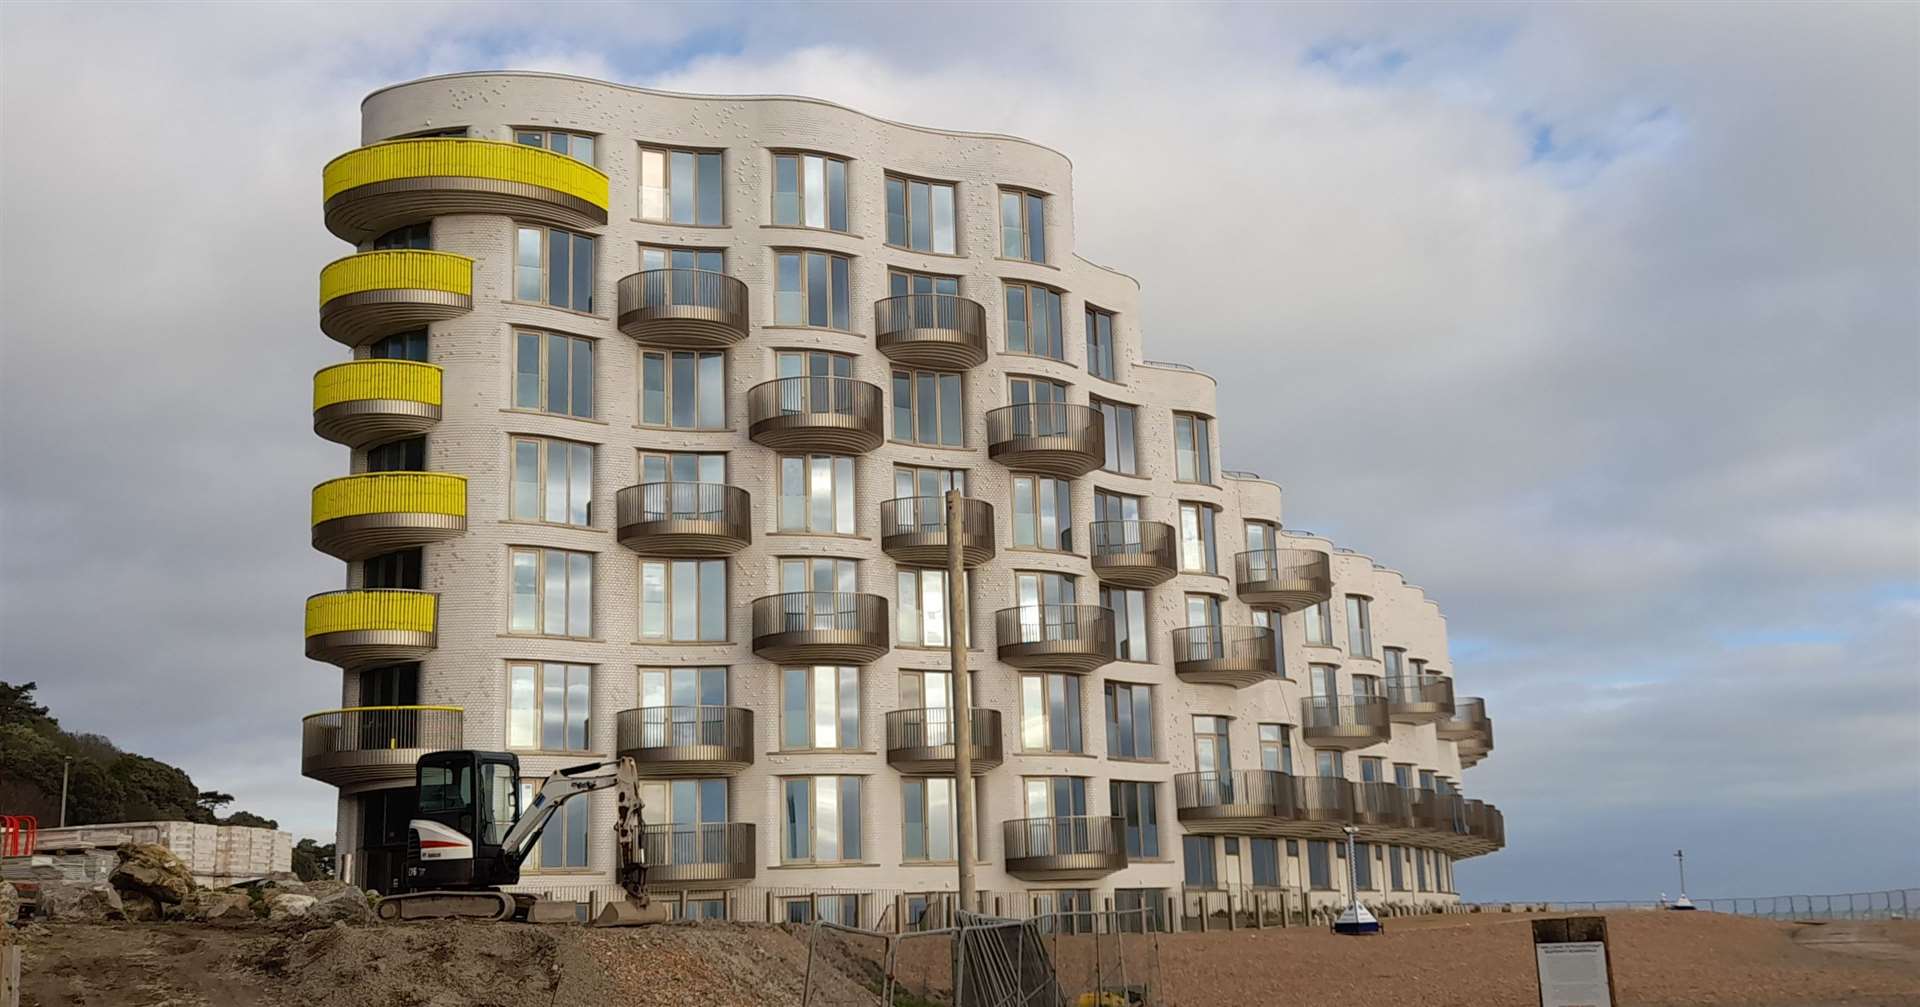 Townhouses at Shoreline Crescent start at £1.85 million and flats at £430,000